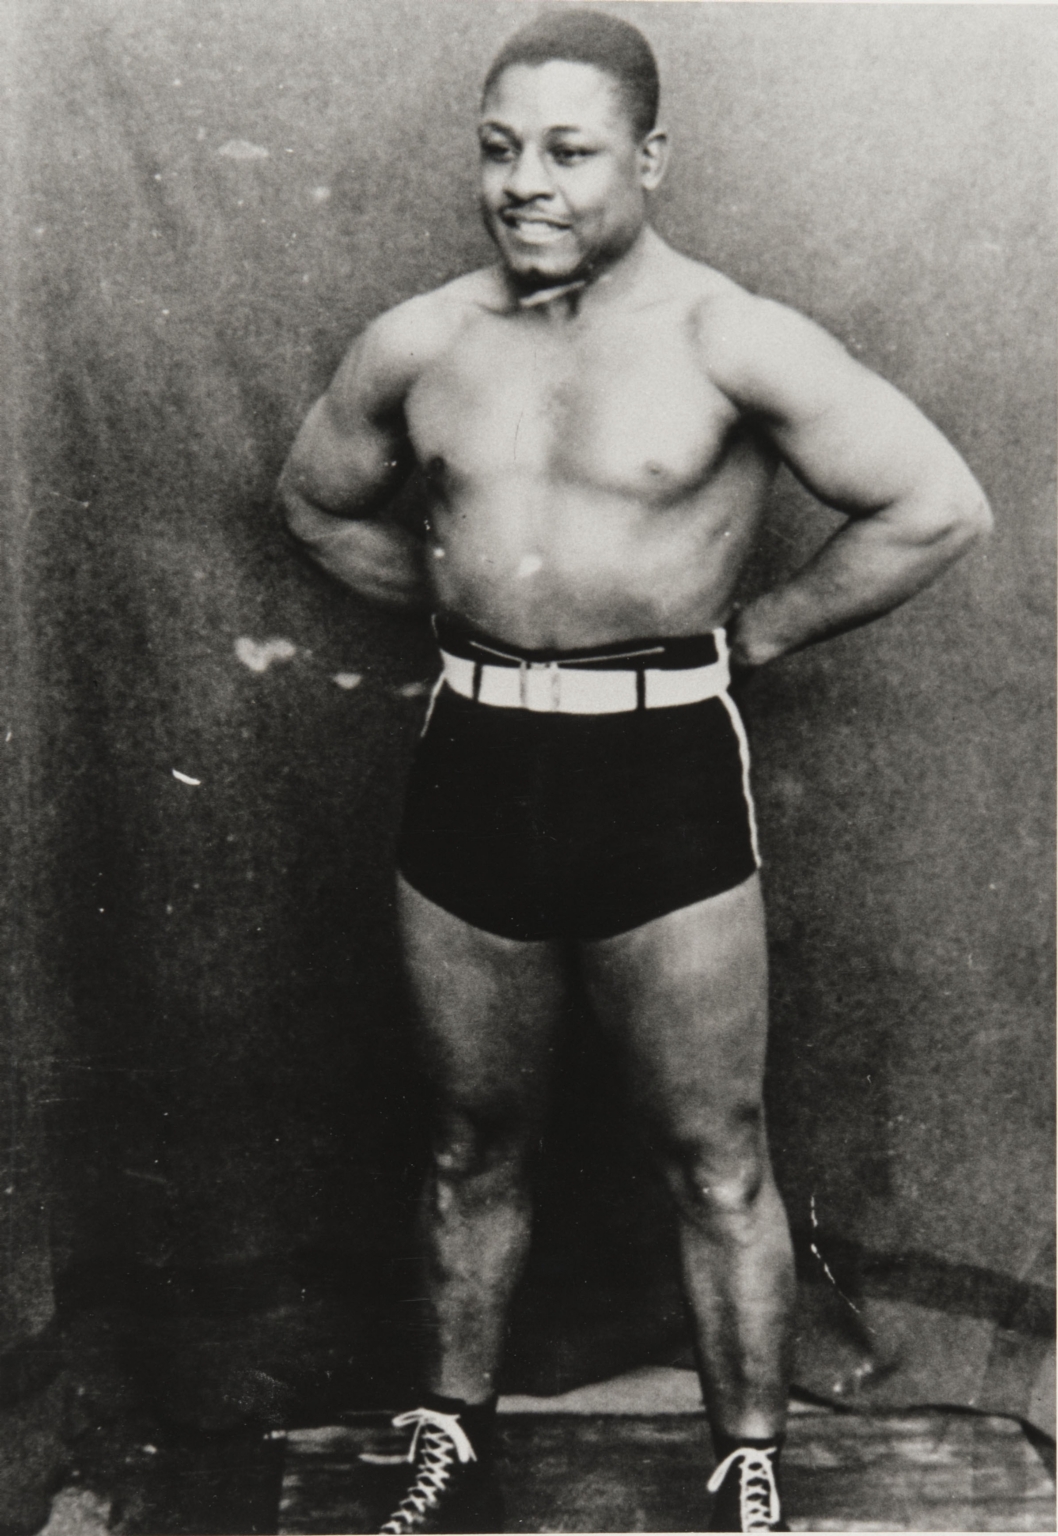 Leroy Gibson, Sr. : 1932 ; known as the "Wichita Wildcat" in professional boxing. Leroy Gibson was a resident of Ventura and the founder of Gibson Barbeque on Figueroa Street.